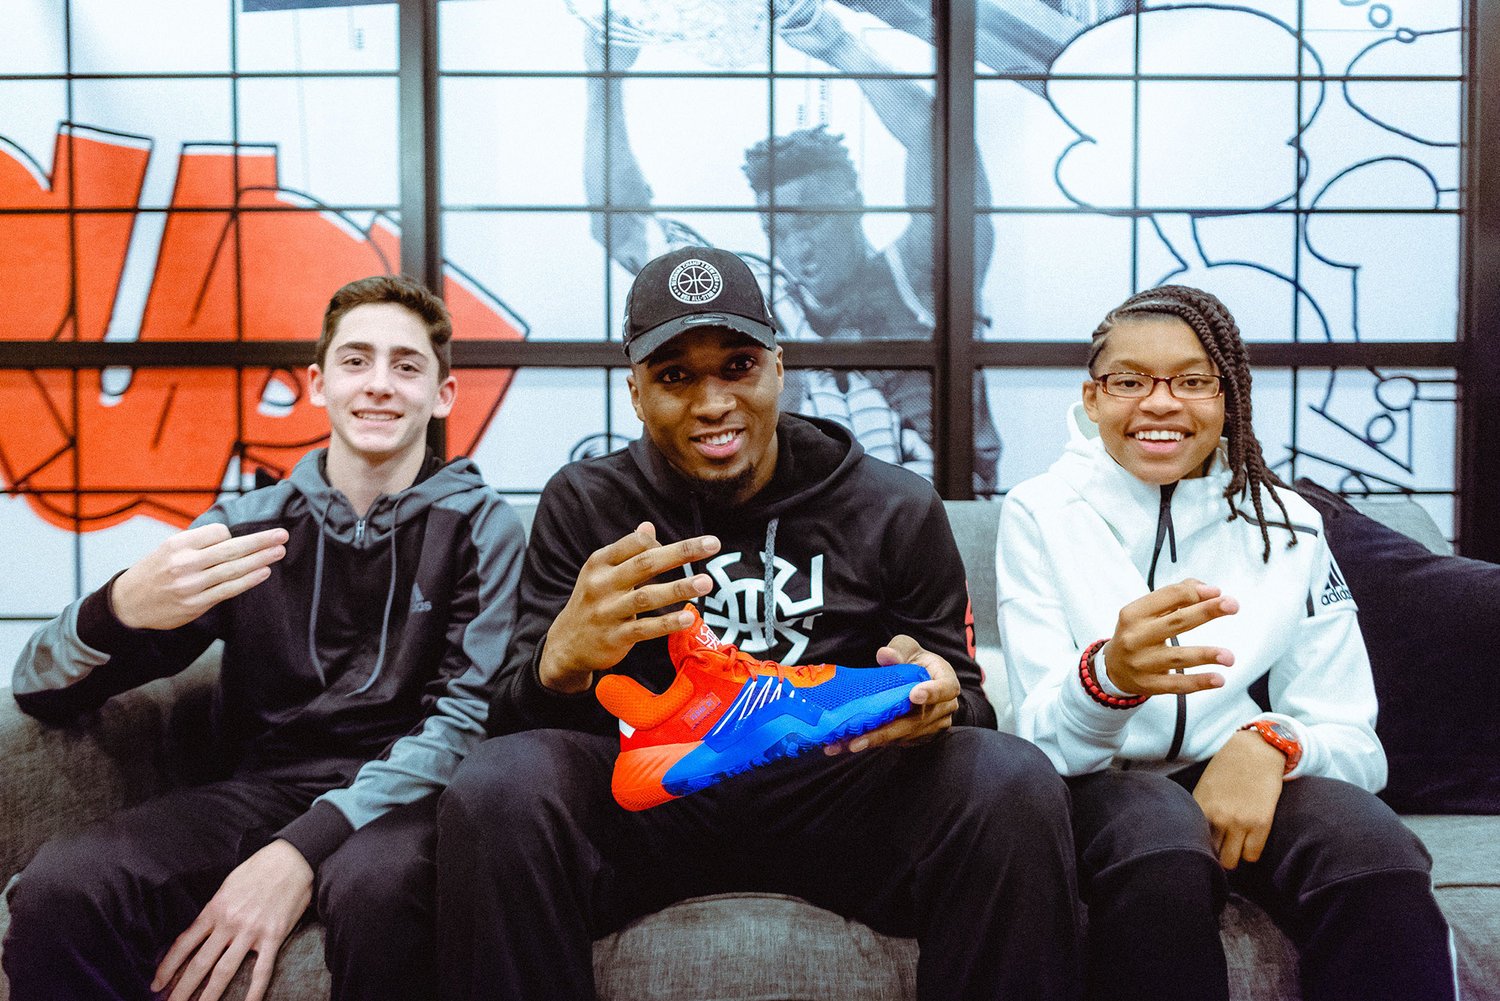 Donovan Mitchell Gives Back to His Alma Mater With New Sneaker